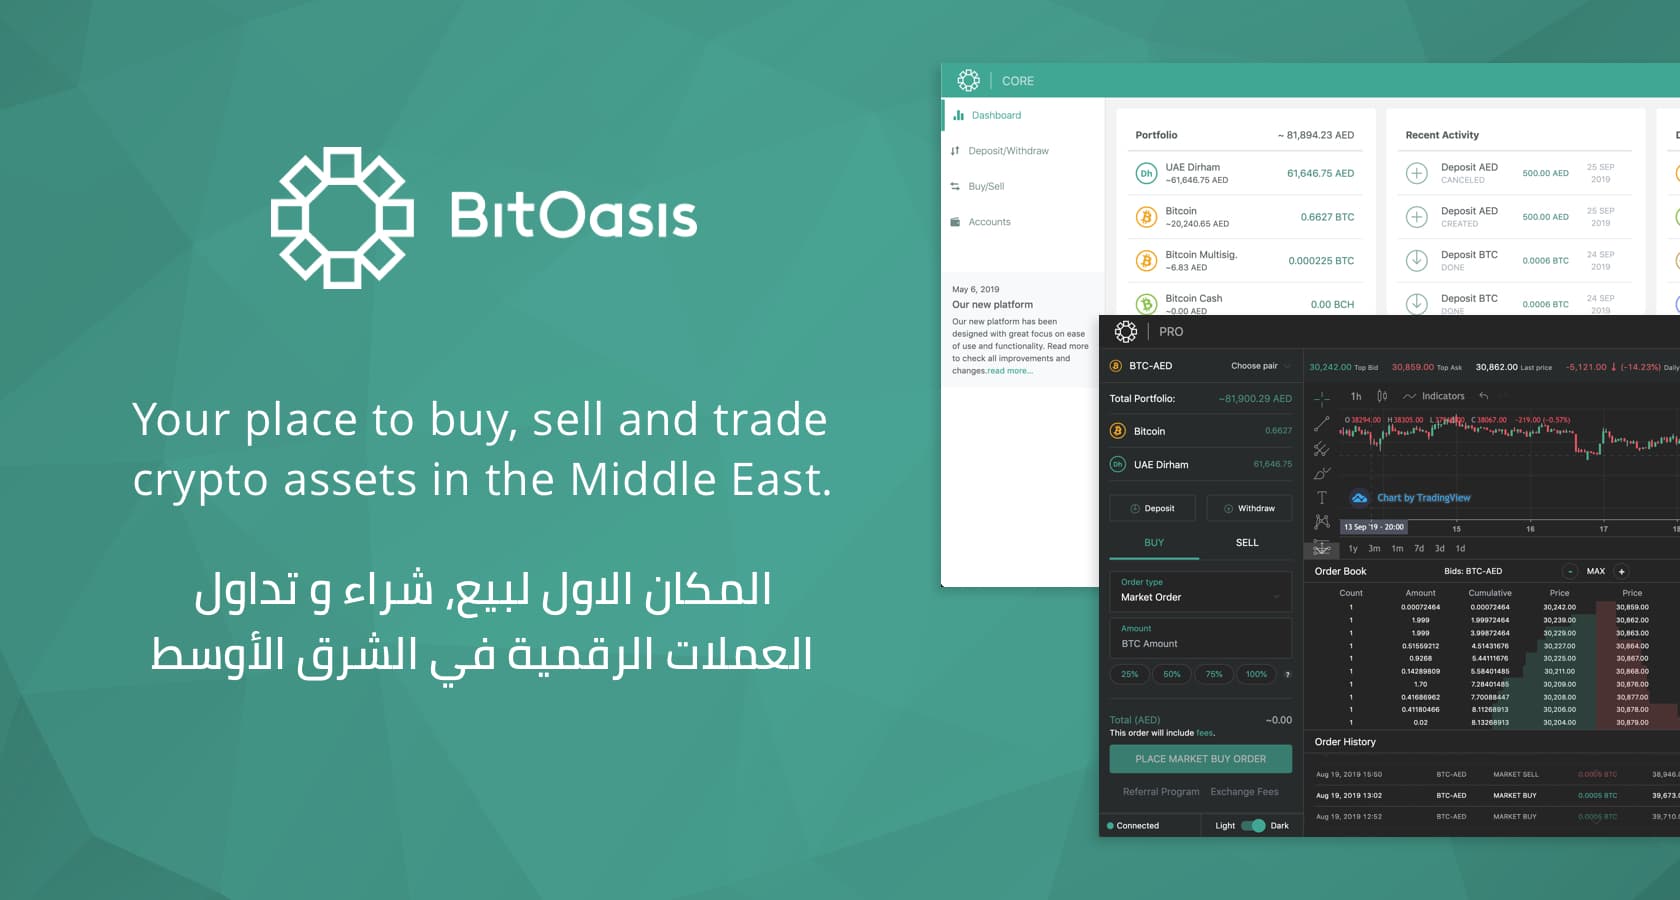 BitOasis simplifies crypto trading for beginners - Introduces new features on its platform